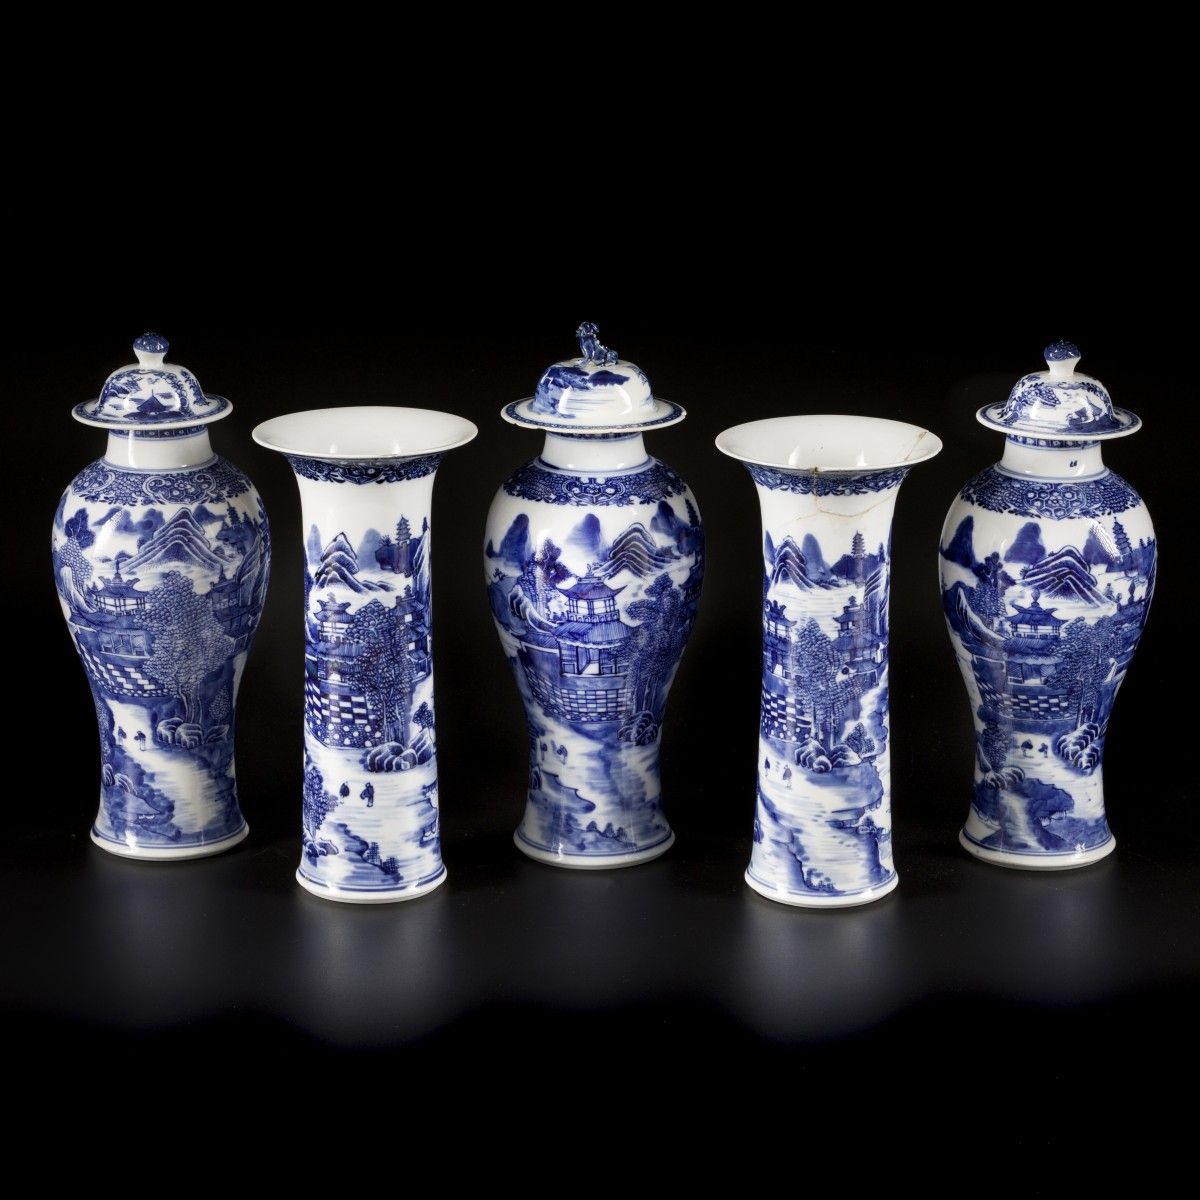 A (5)-piece porcelain garniture set with river and pagoda decoration, China, 18t&hellip;